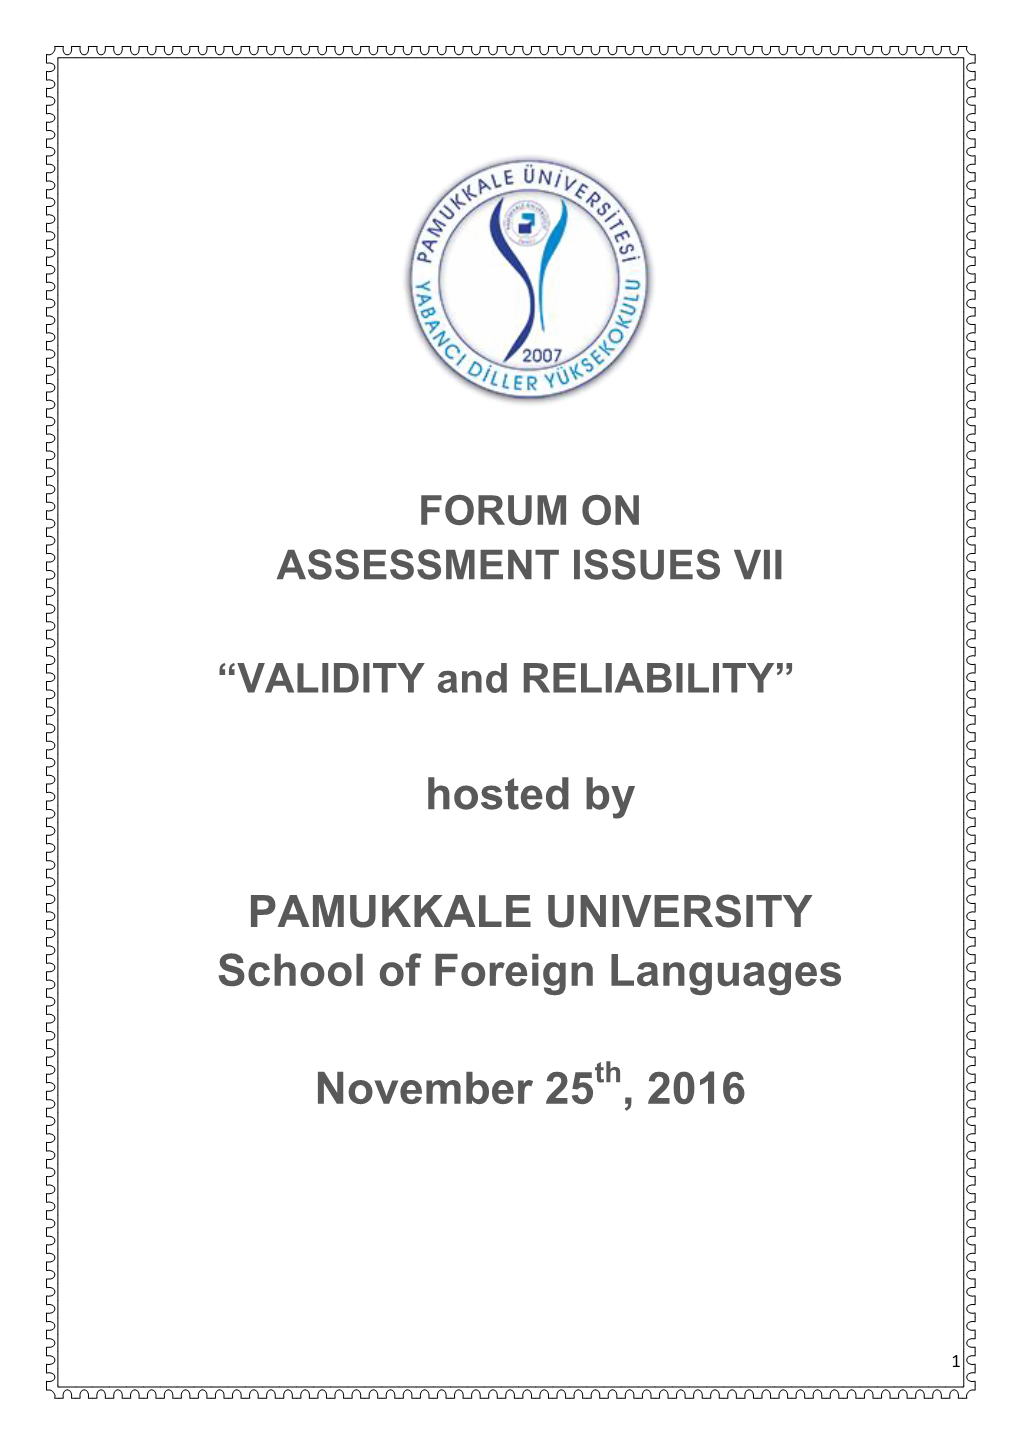 Hosted by PAMUKKALE UNIVERSITY School of Foreign Languages